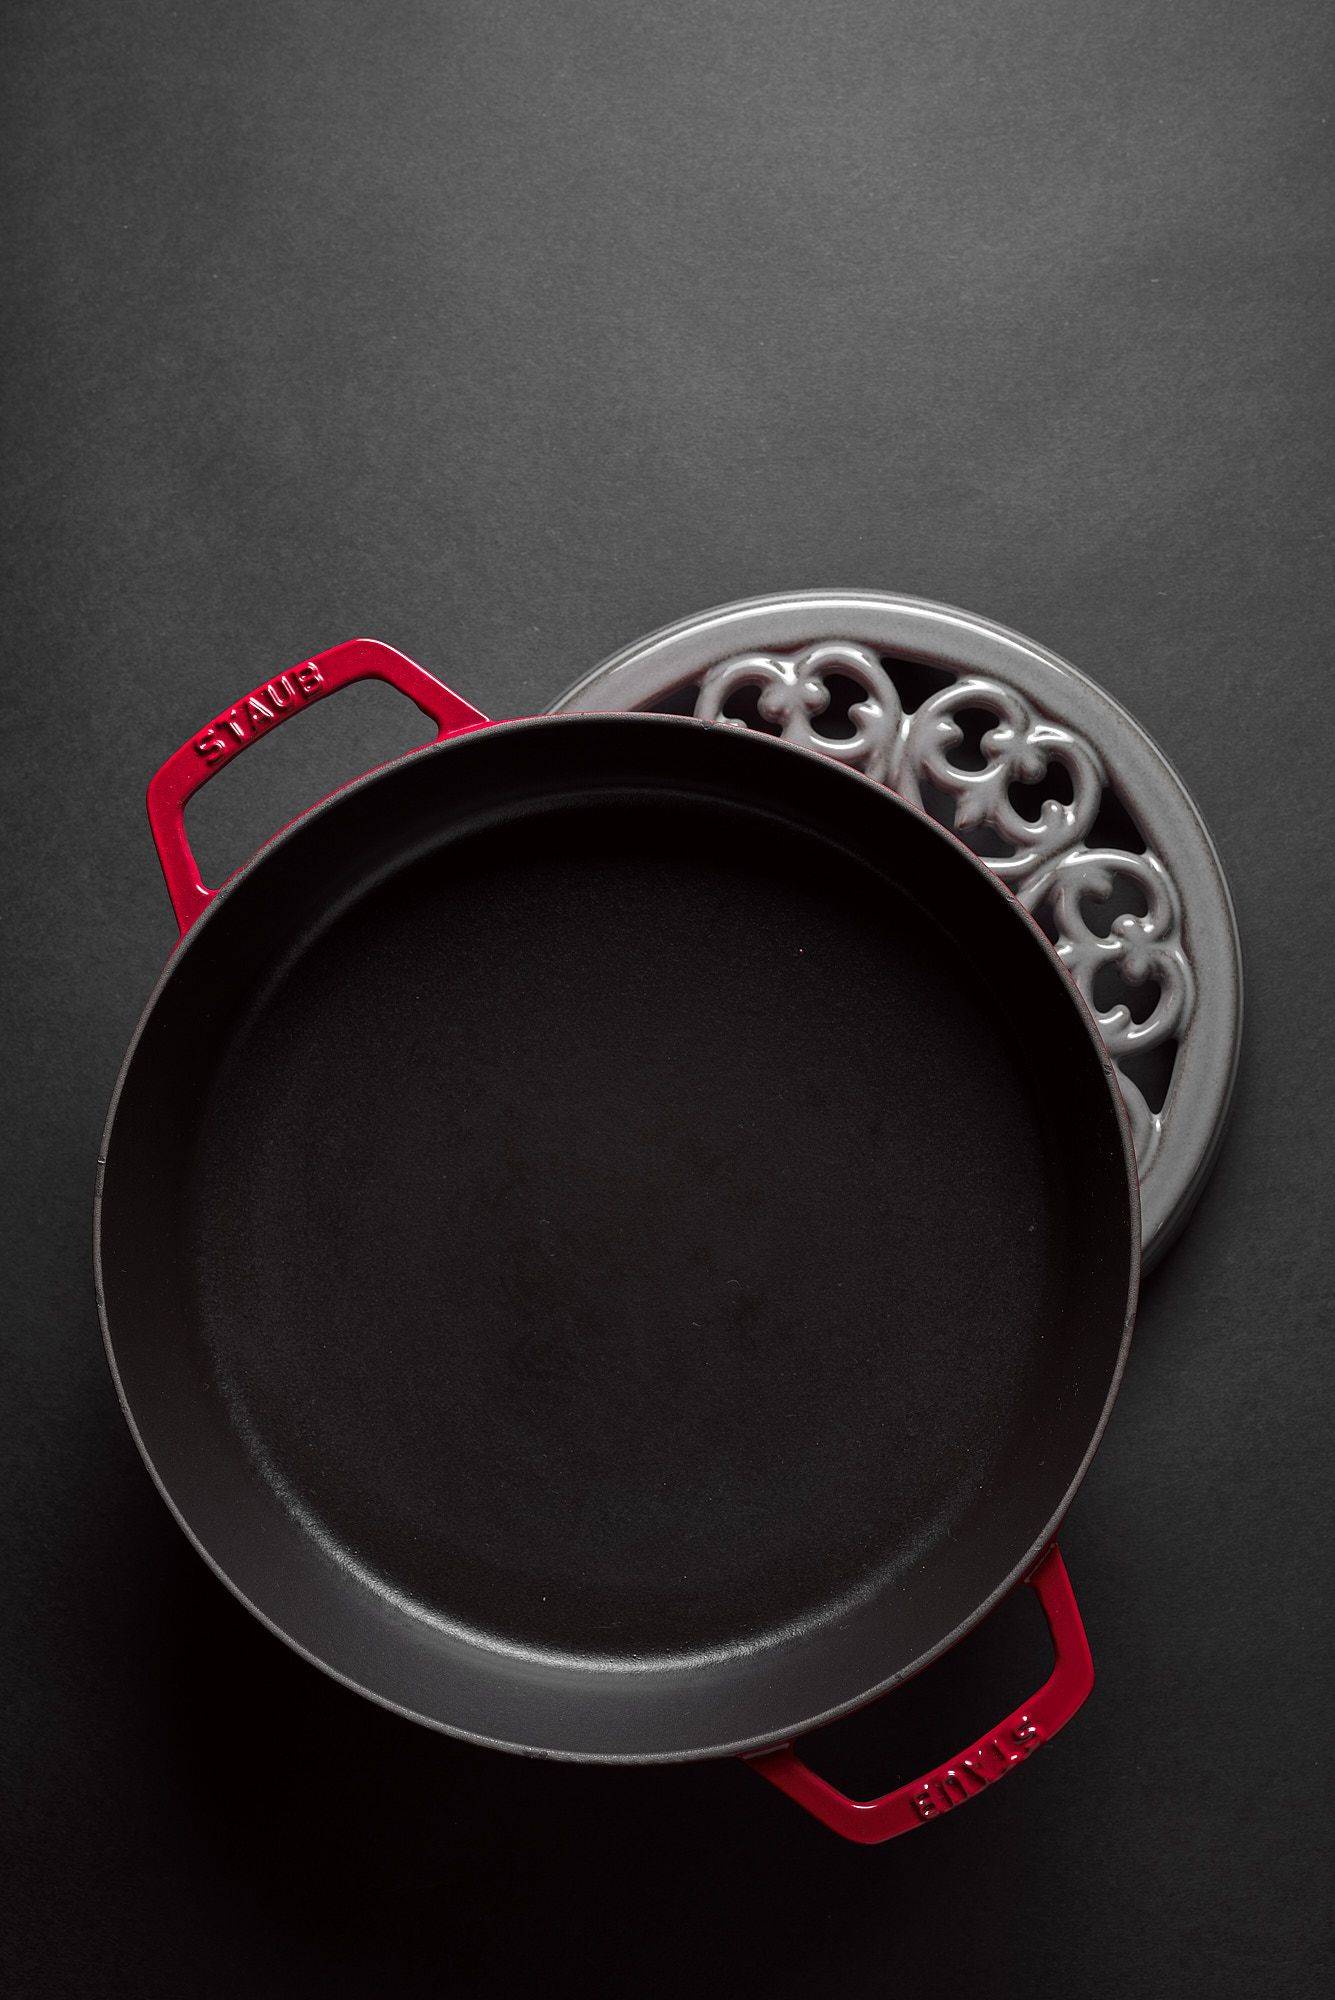 red staub la cocotte cast iron pot and coaster on black background